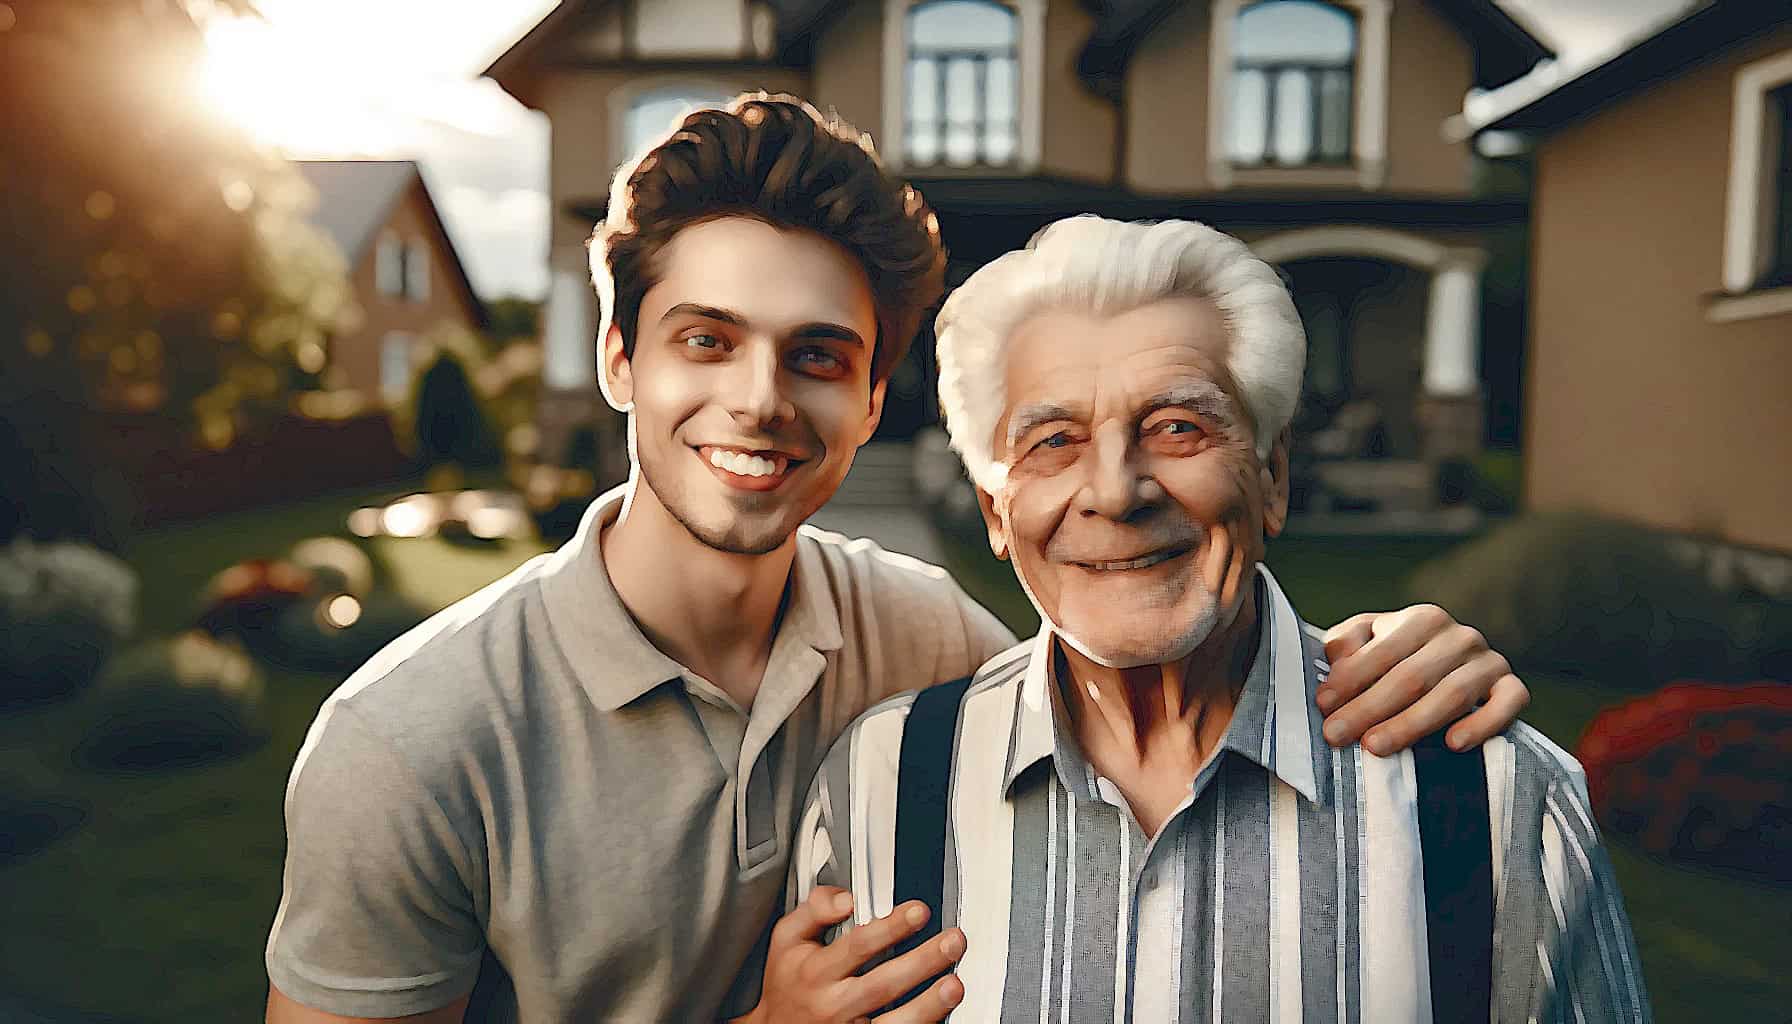 OPM Explained (Real Estate Investing Using Other People's Money) - happy grandpa and grandson